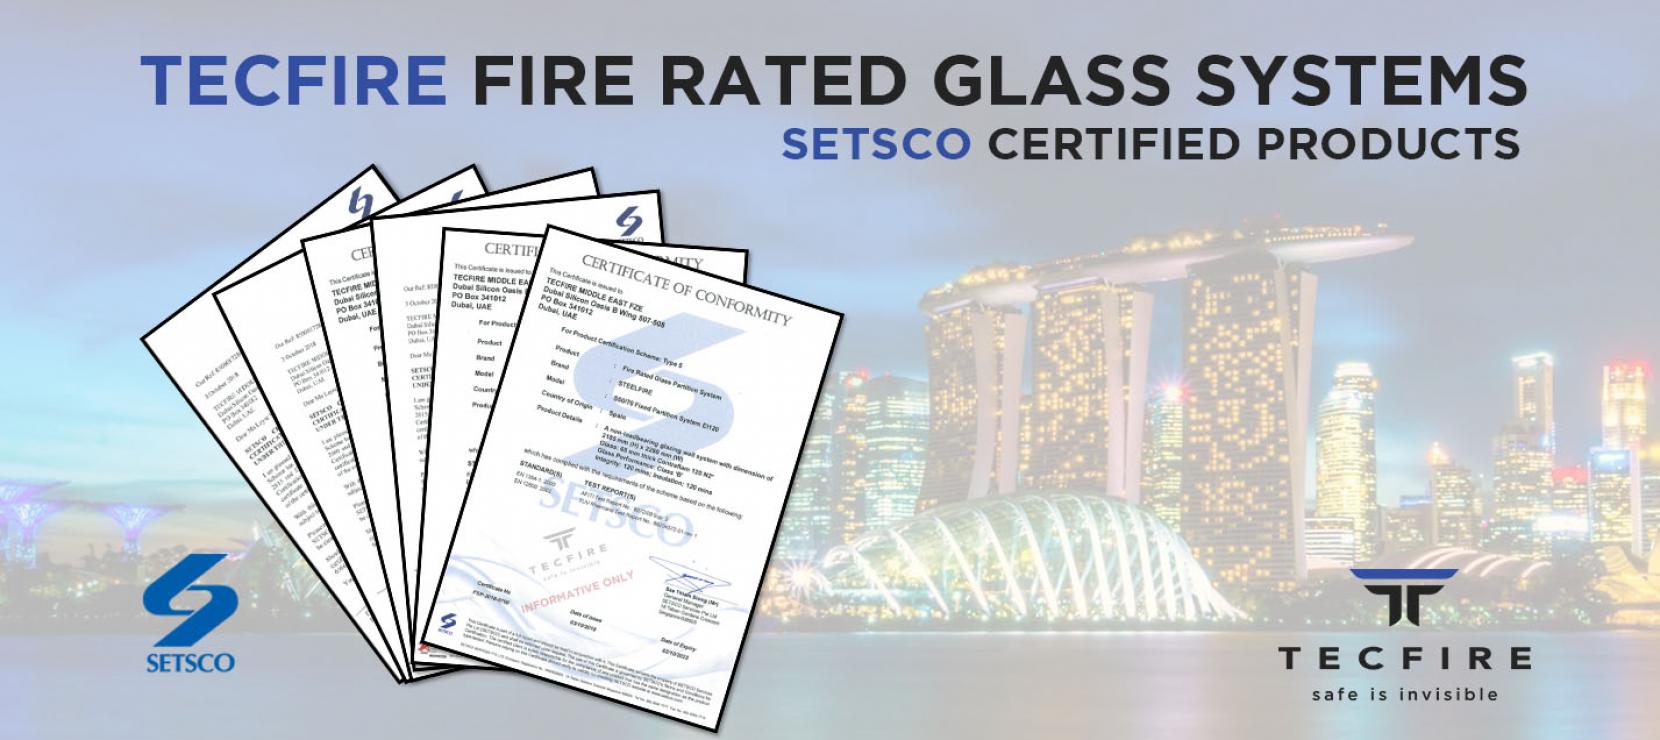 SETSCO Singapore Approved!